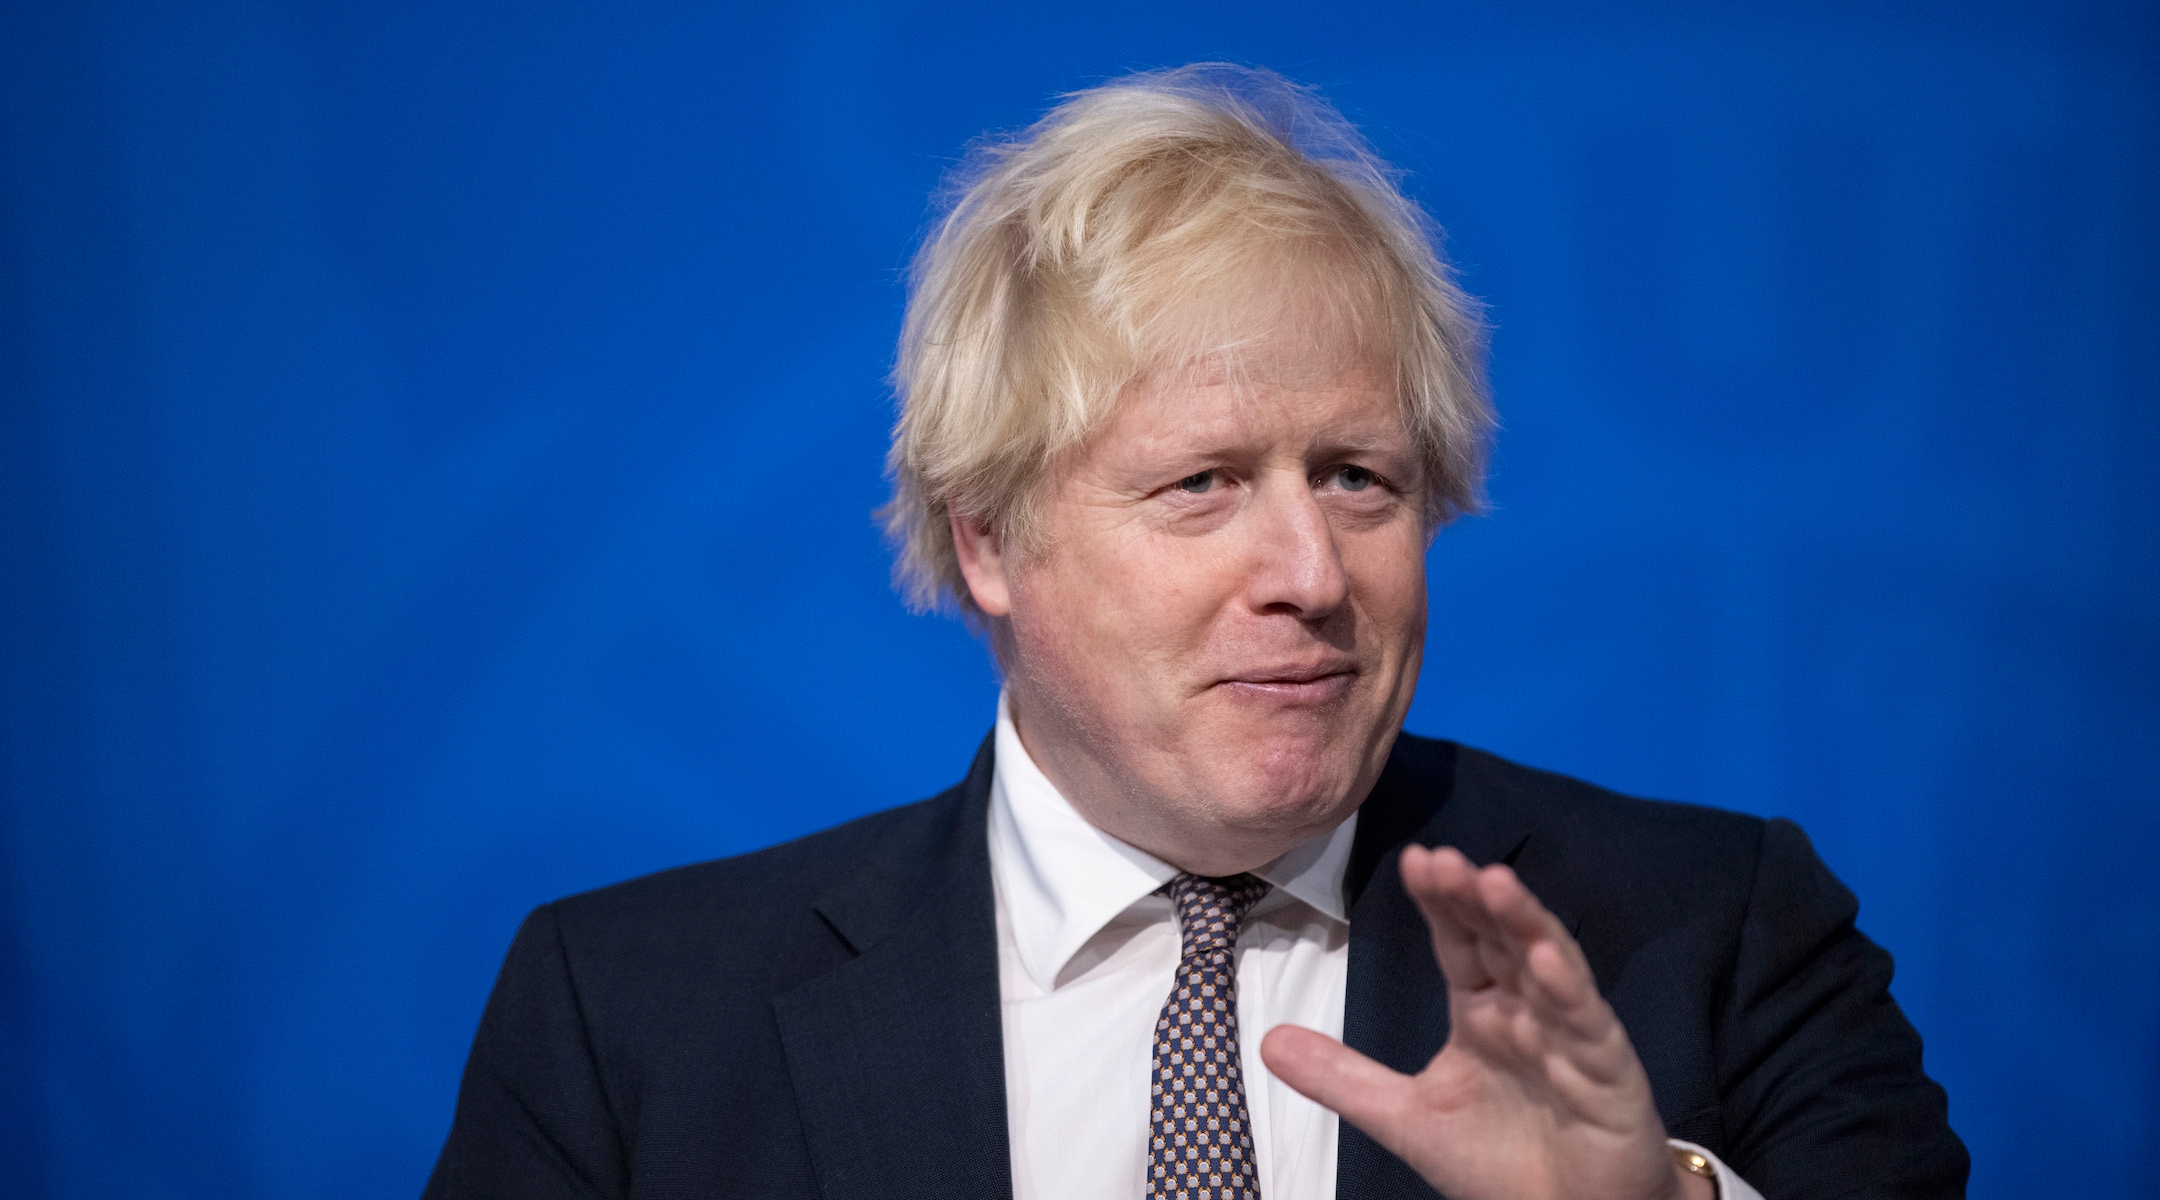 Boris Johnson vows to solve Northern Ireland’s Brexit-related kosher food shortages